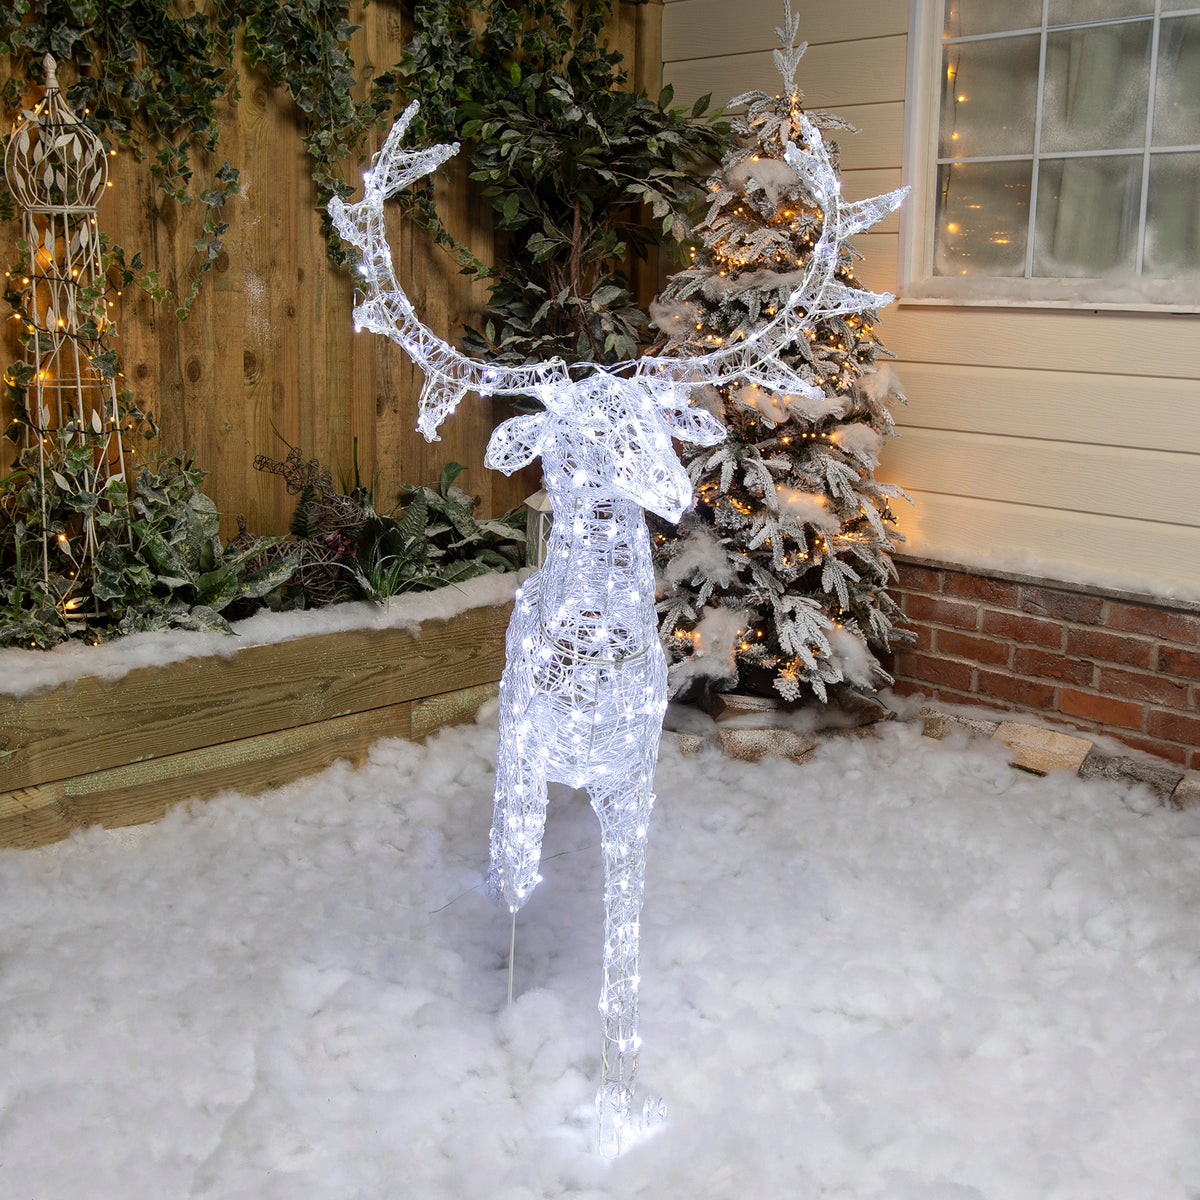 Christmas Reindeer Light - 1.4M Soft Acrylic Outdoor Light Up Stag with 330 White LEDs